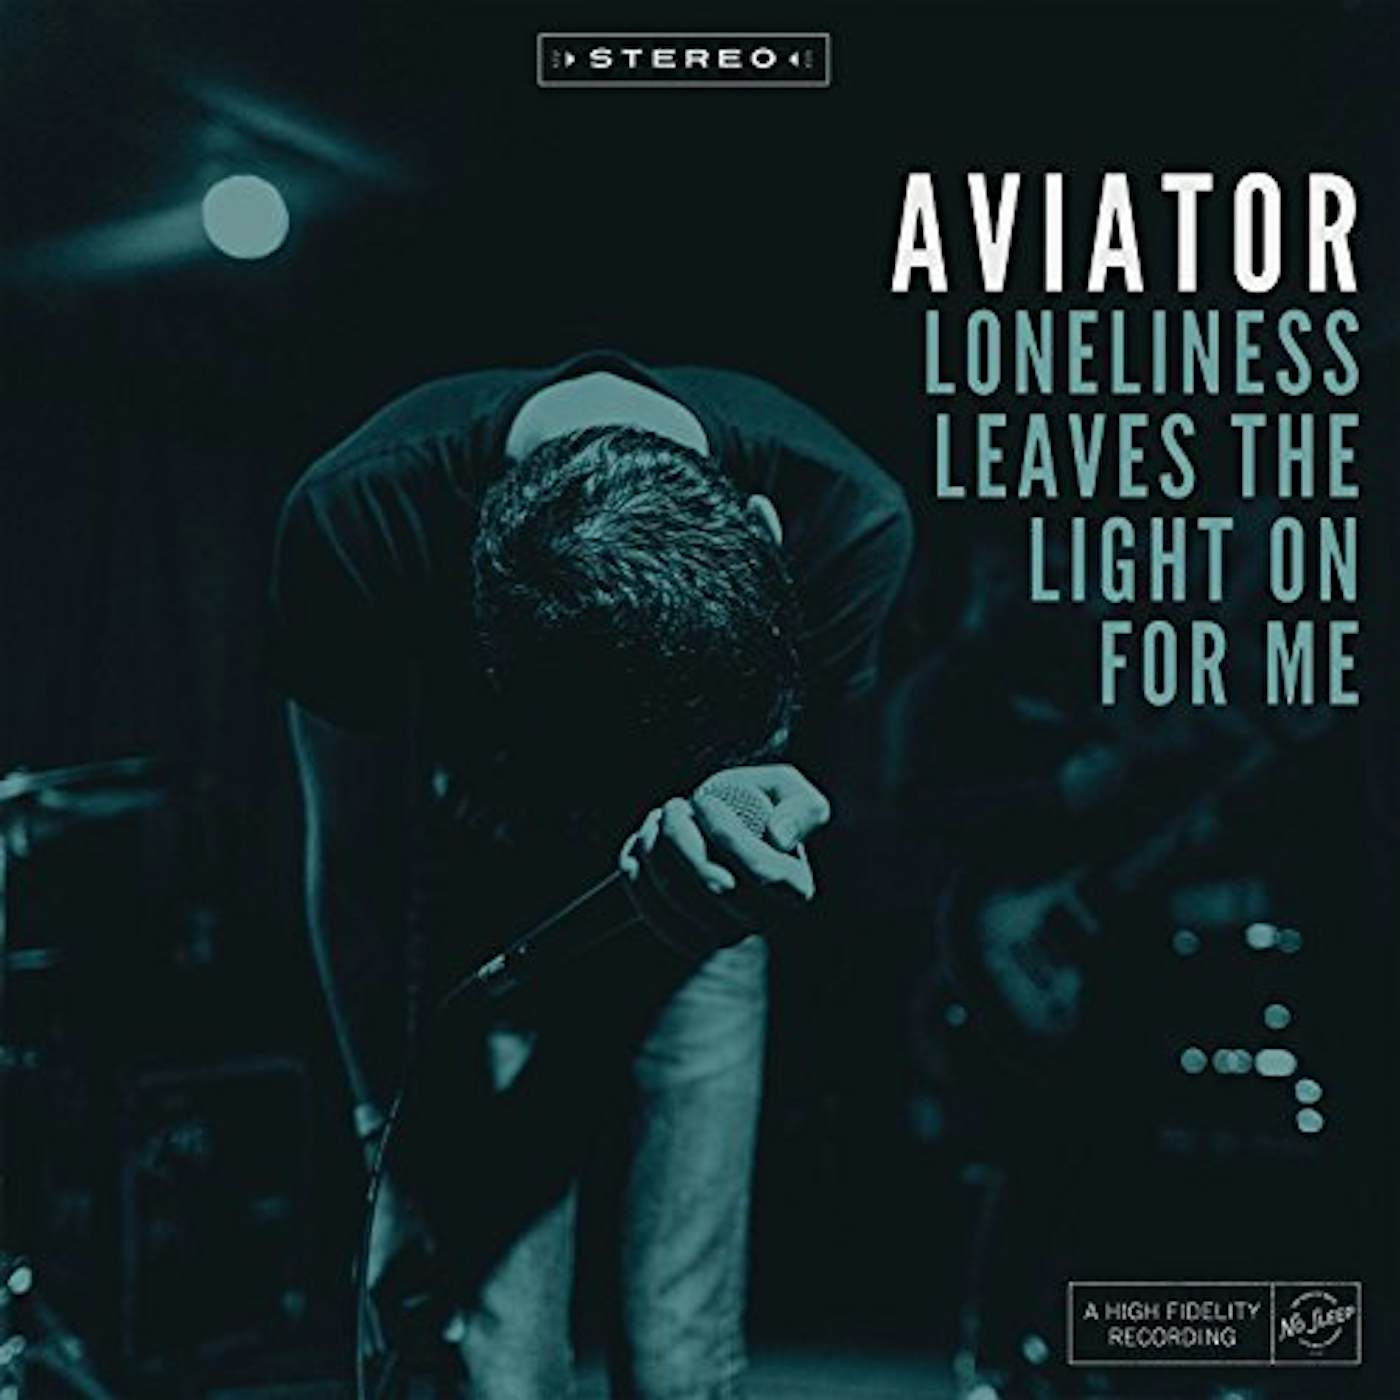 Aviator Loneliness Leaves the Light on for Me Vinyl Record